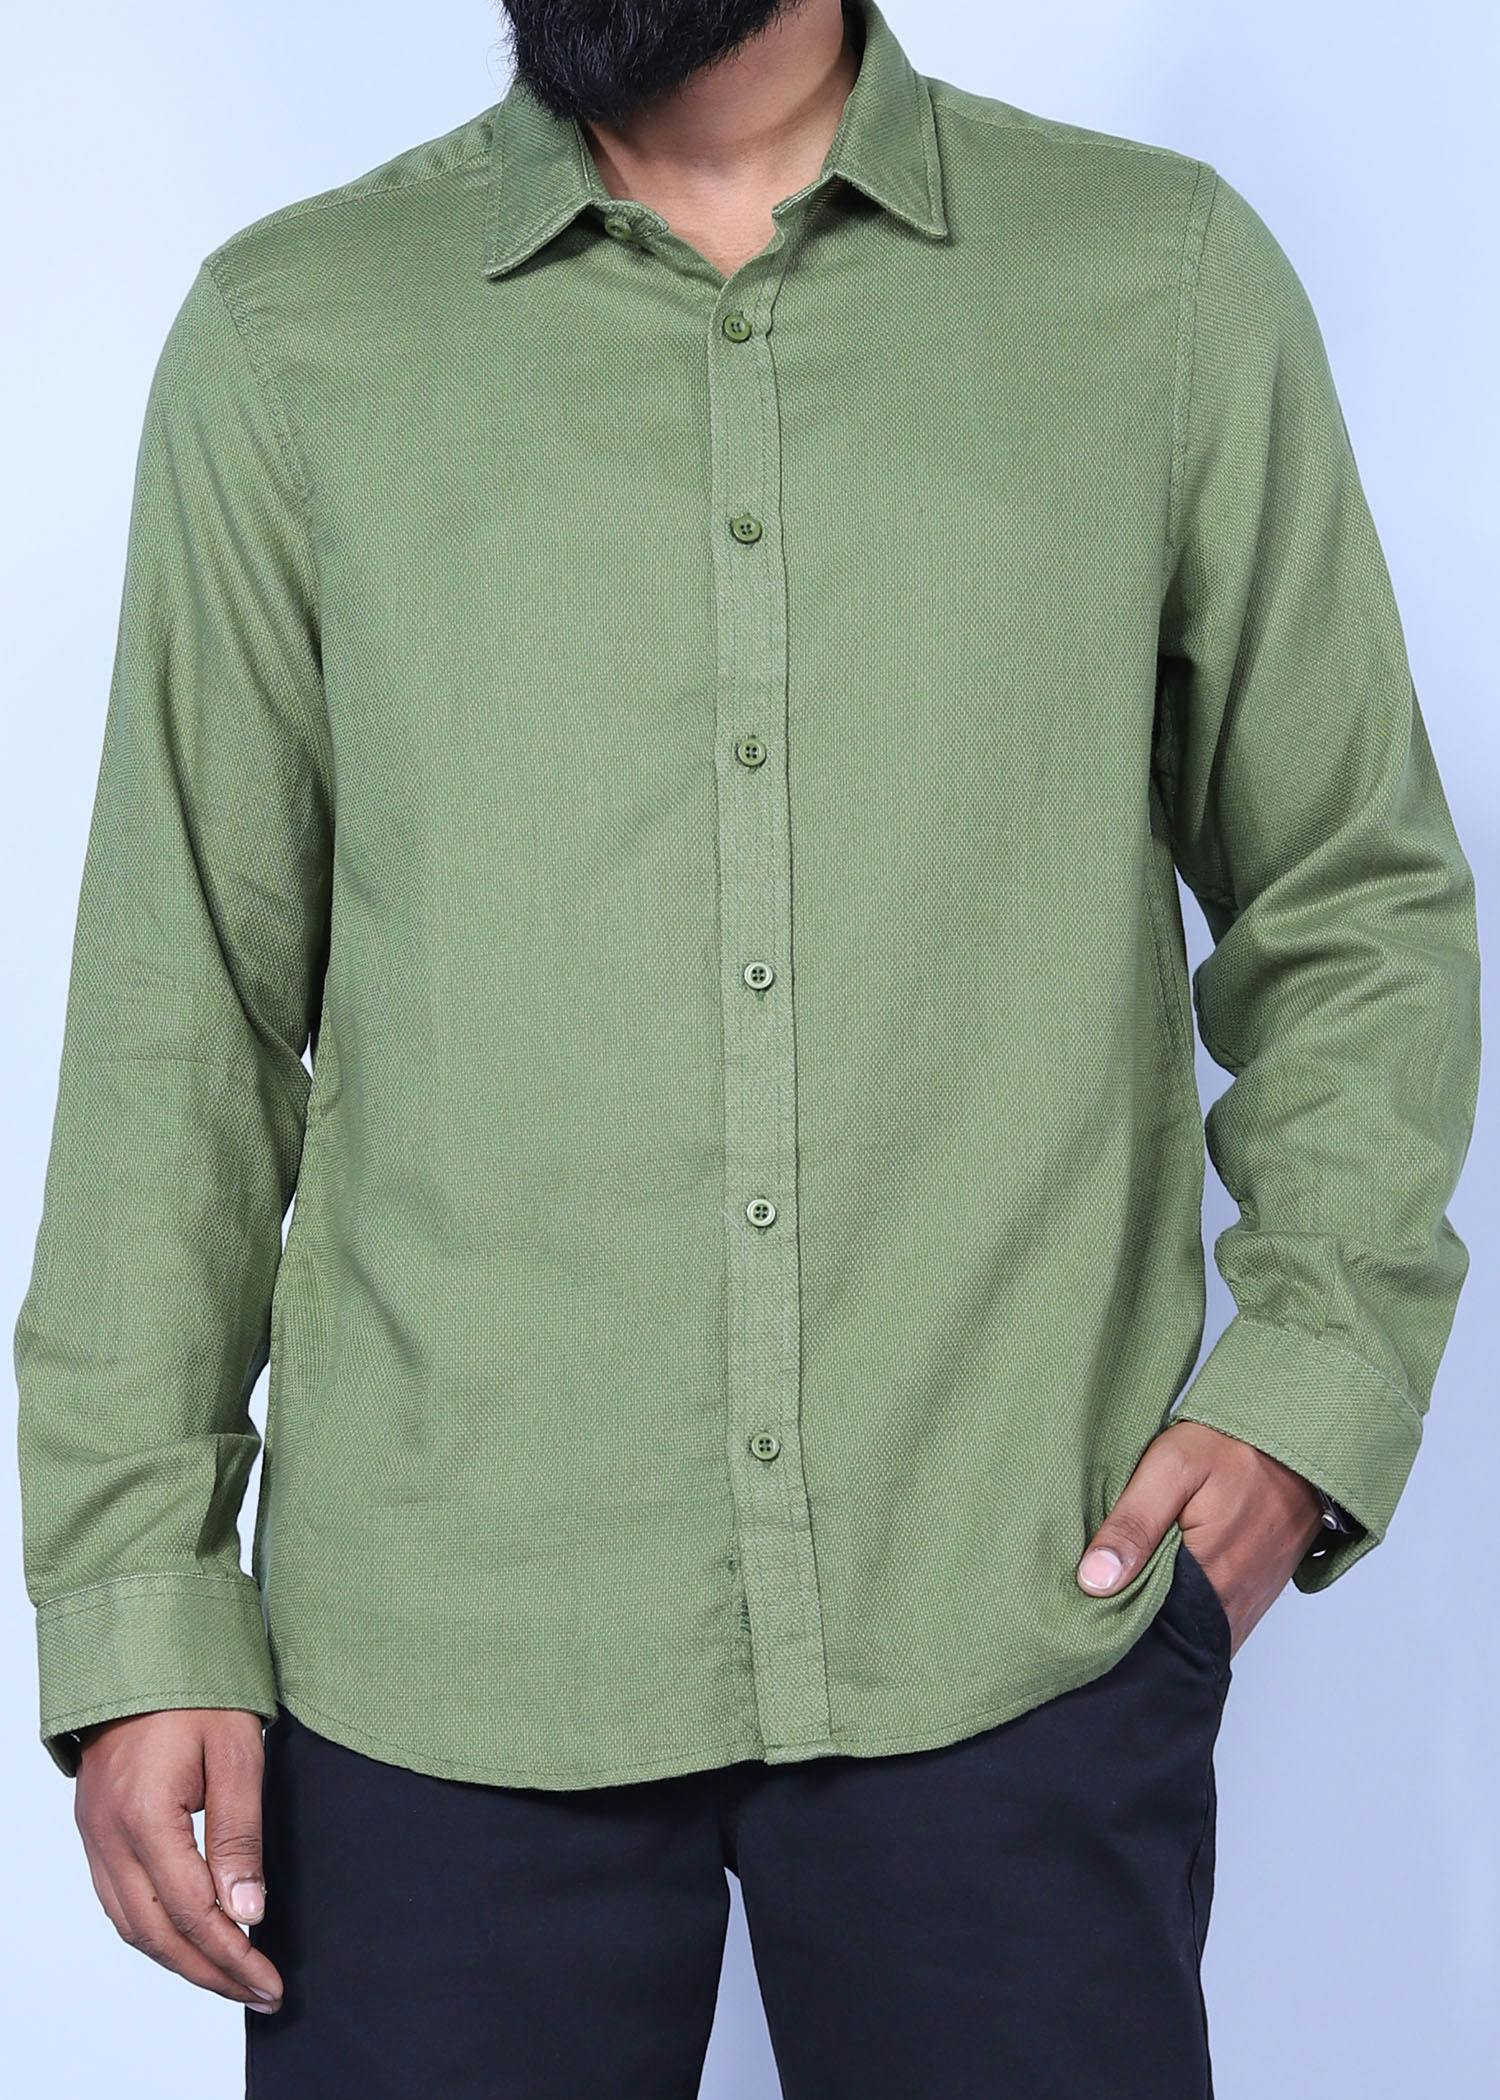 istanbul xv fs shirt olive color facecropped